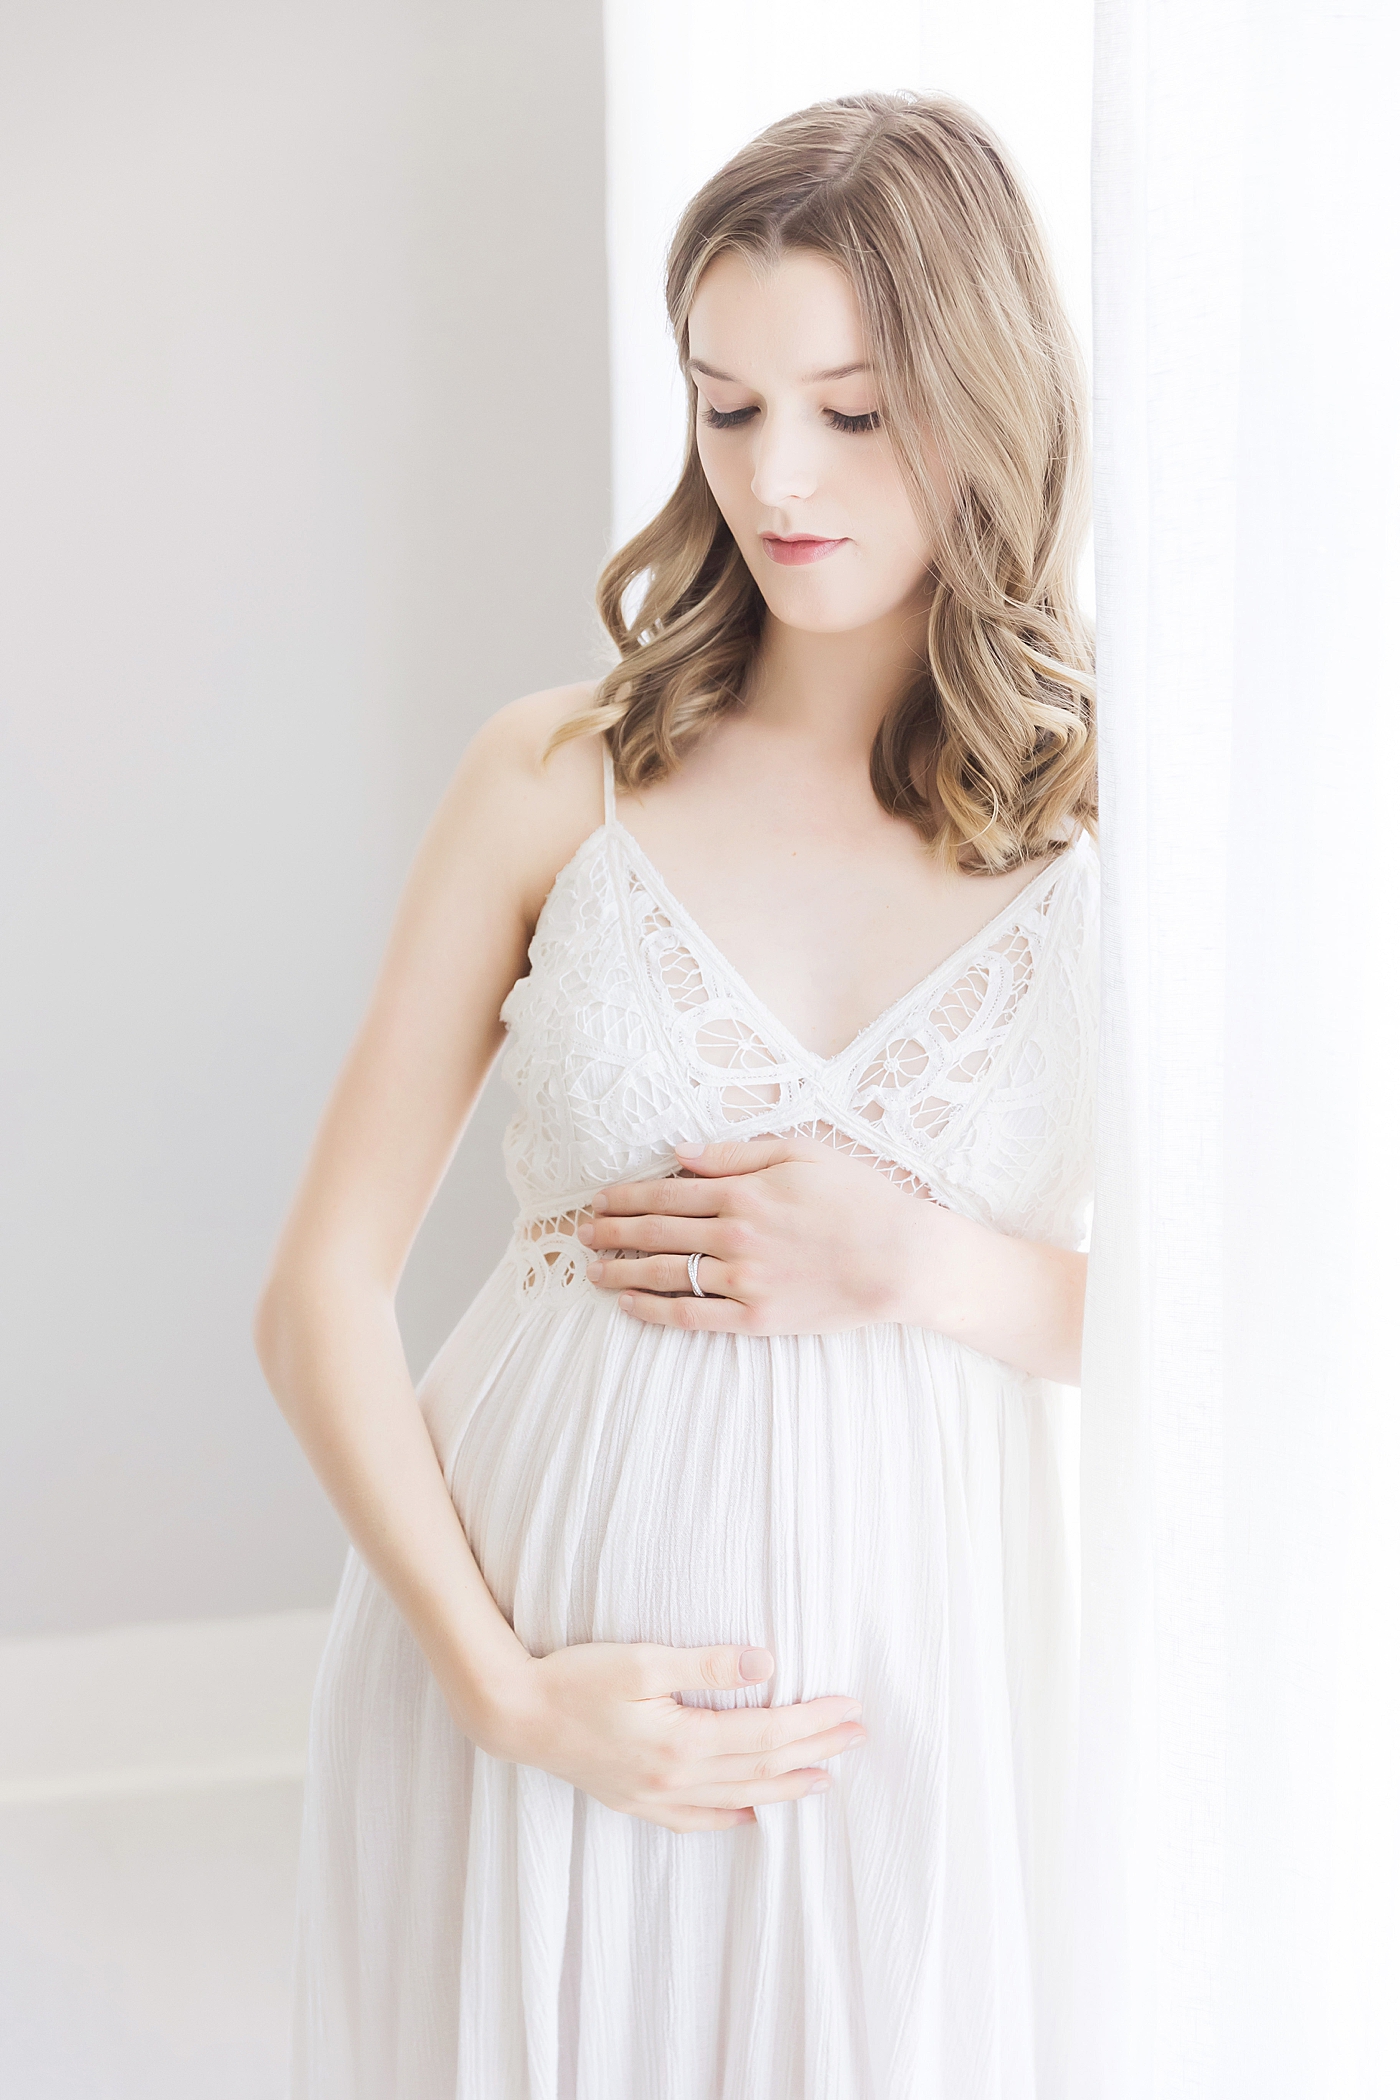 Expecting mom in white lace dress against window for maternity photos. Photo by Fresh Light Photography.